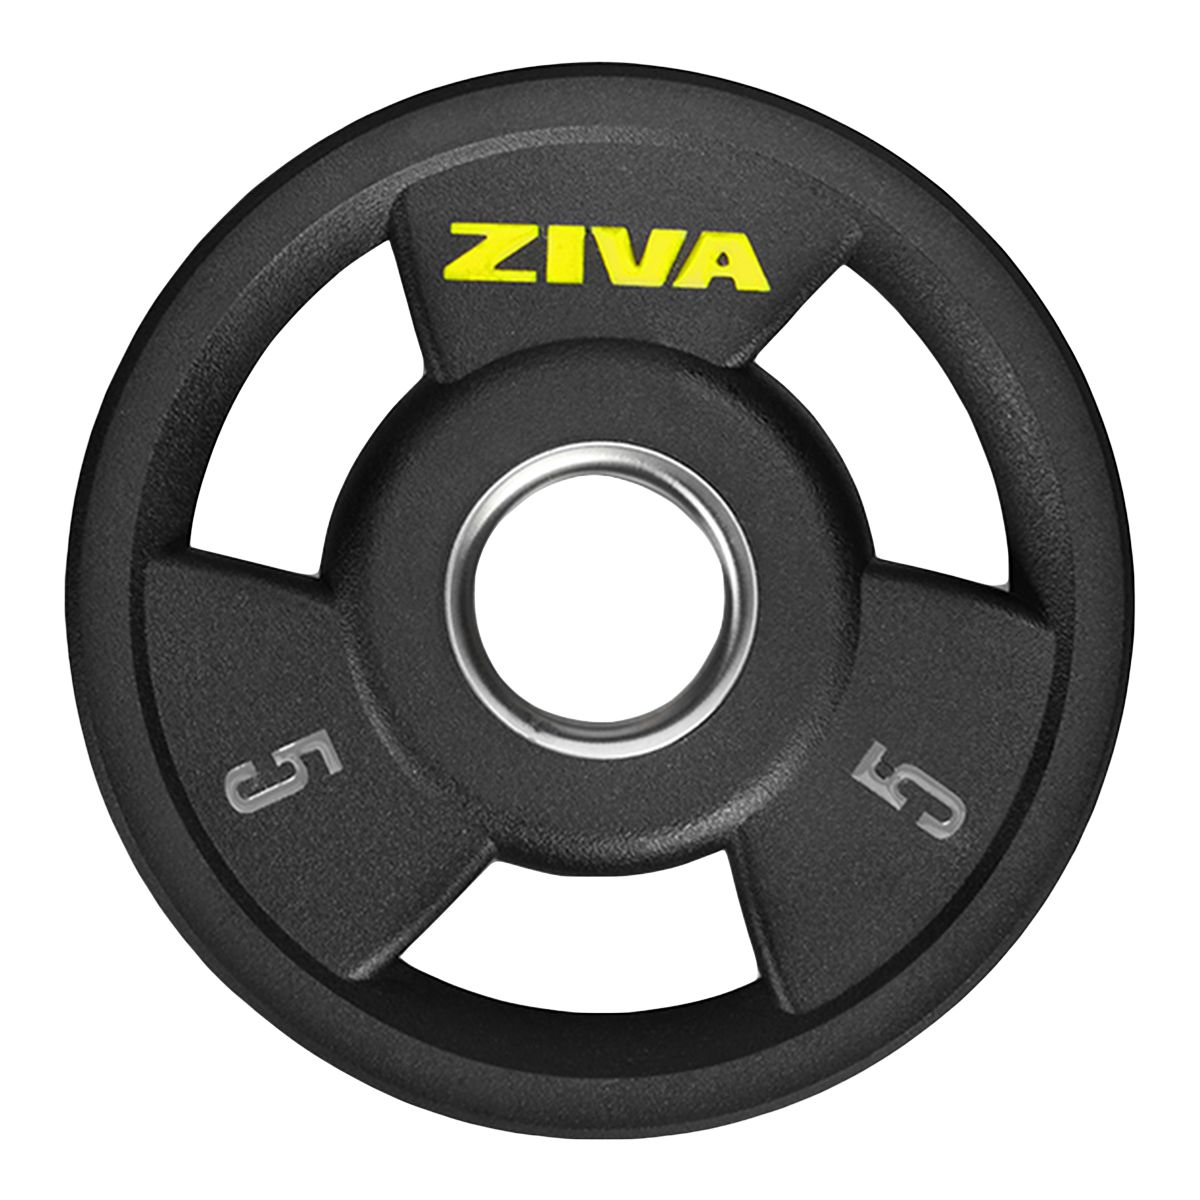 Image of Ziva Performance Rubber Grip 5 lb Weight Disc Weight Home Gym